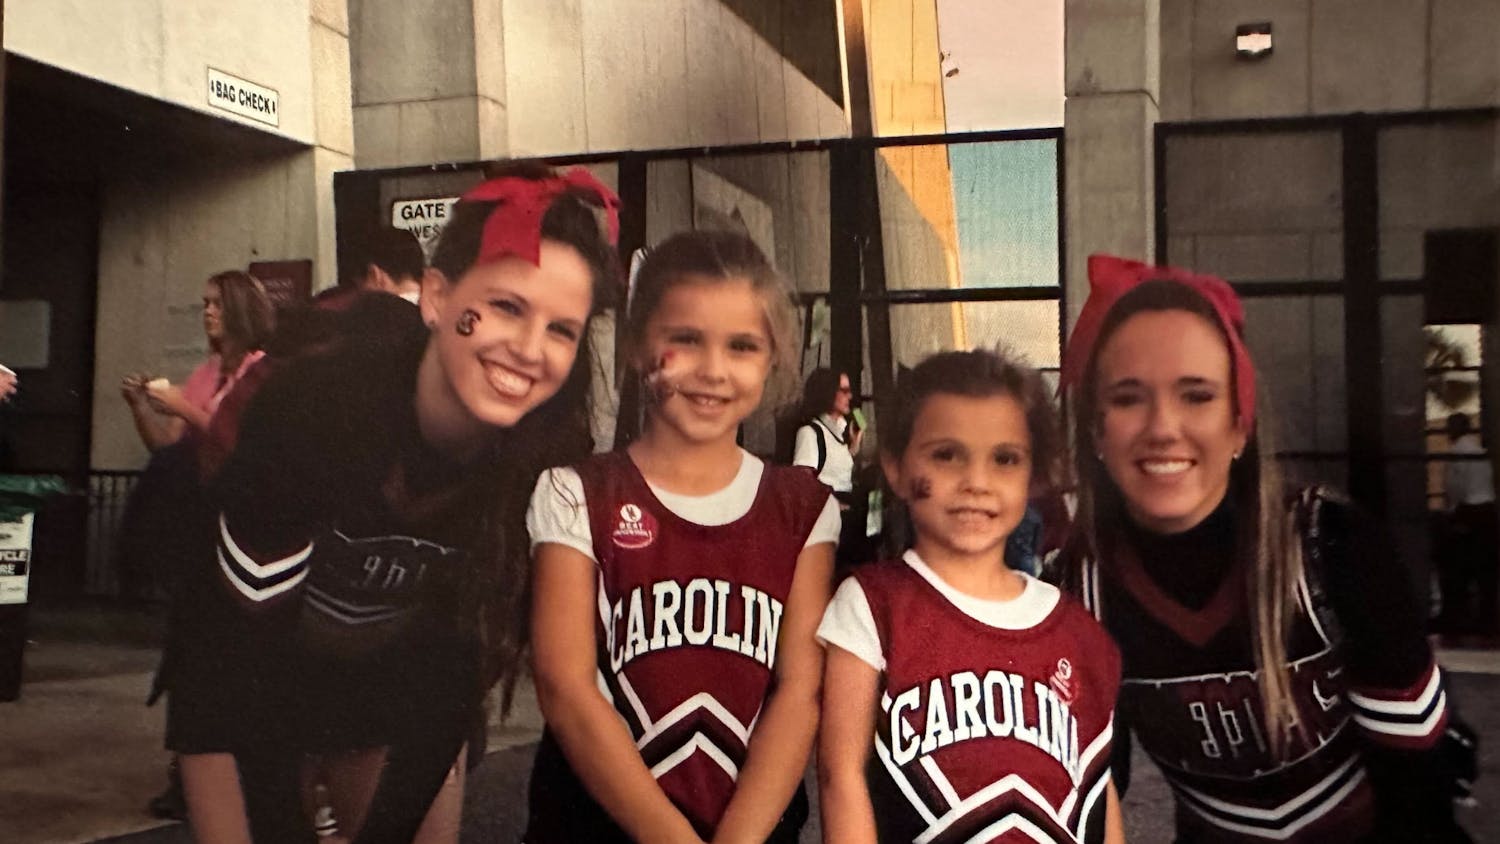 Camila and Sophia Burnett pose next to Gamecock cheerleaders in their own cheerleading outfits. Growing up as Gamecock fans in Hilton Head, S.C., the sisters said attending games was not an uncommon occurrence for their family.